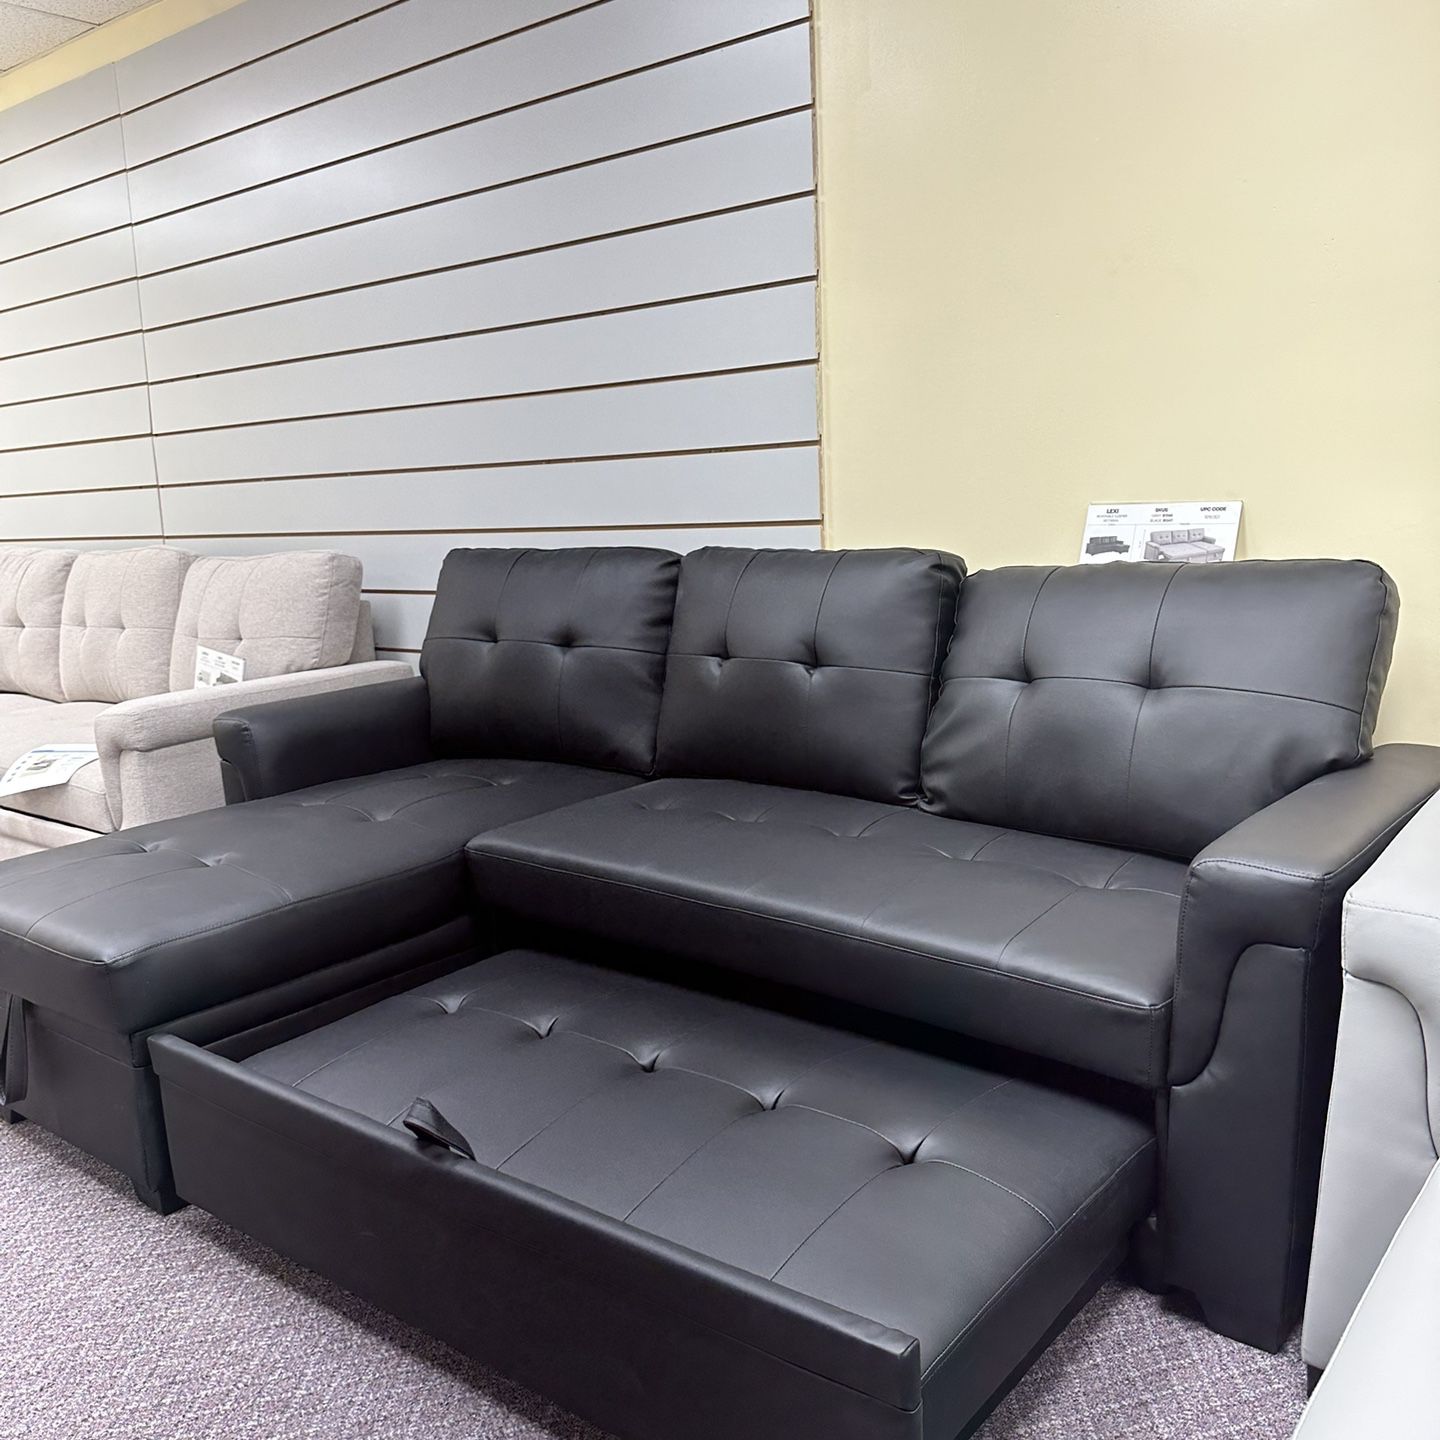 Brand new sectional in box- Flexible Payment options available $39 down. (Limited supply) 